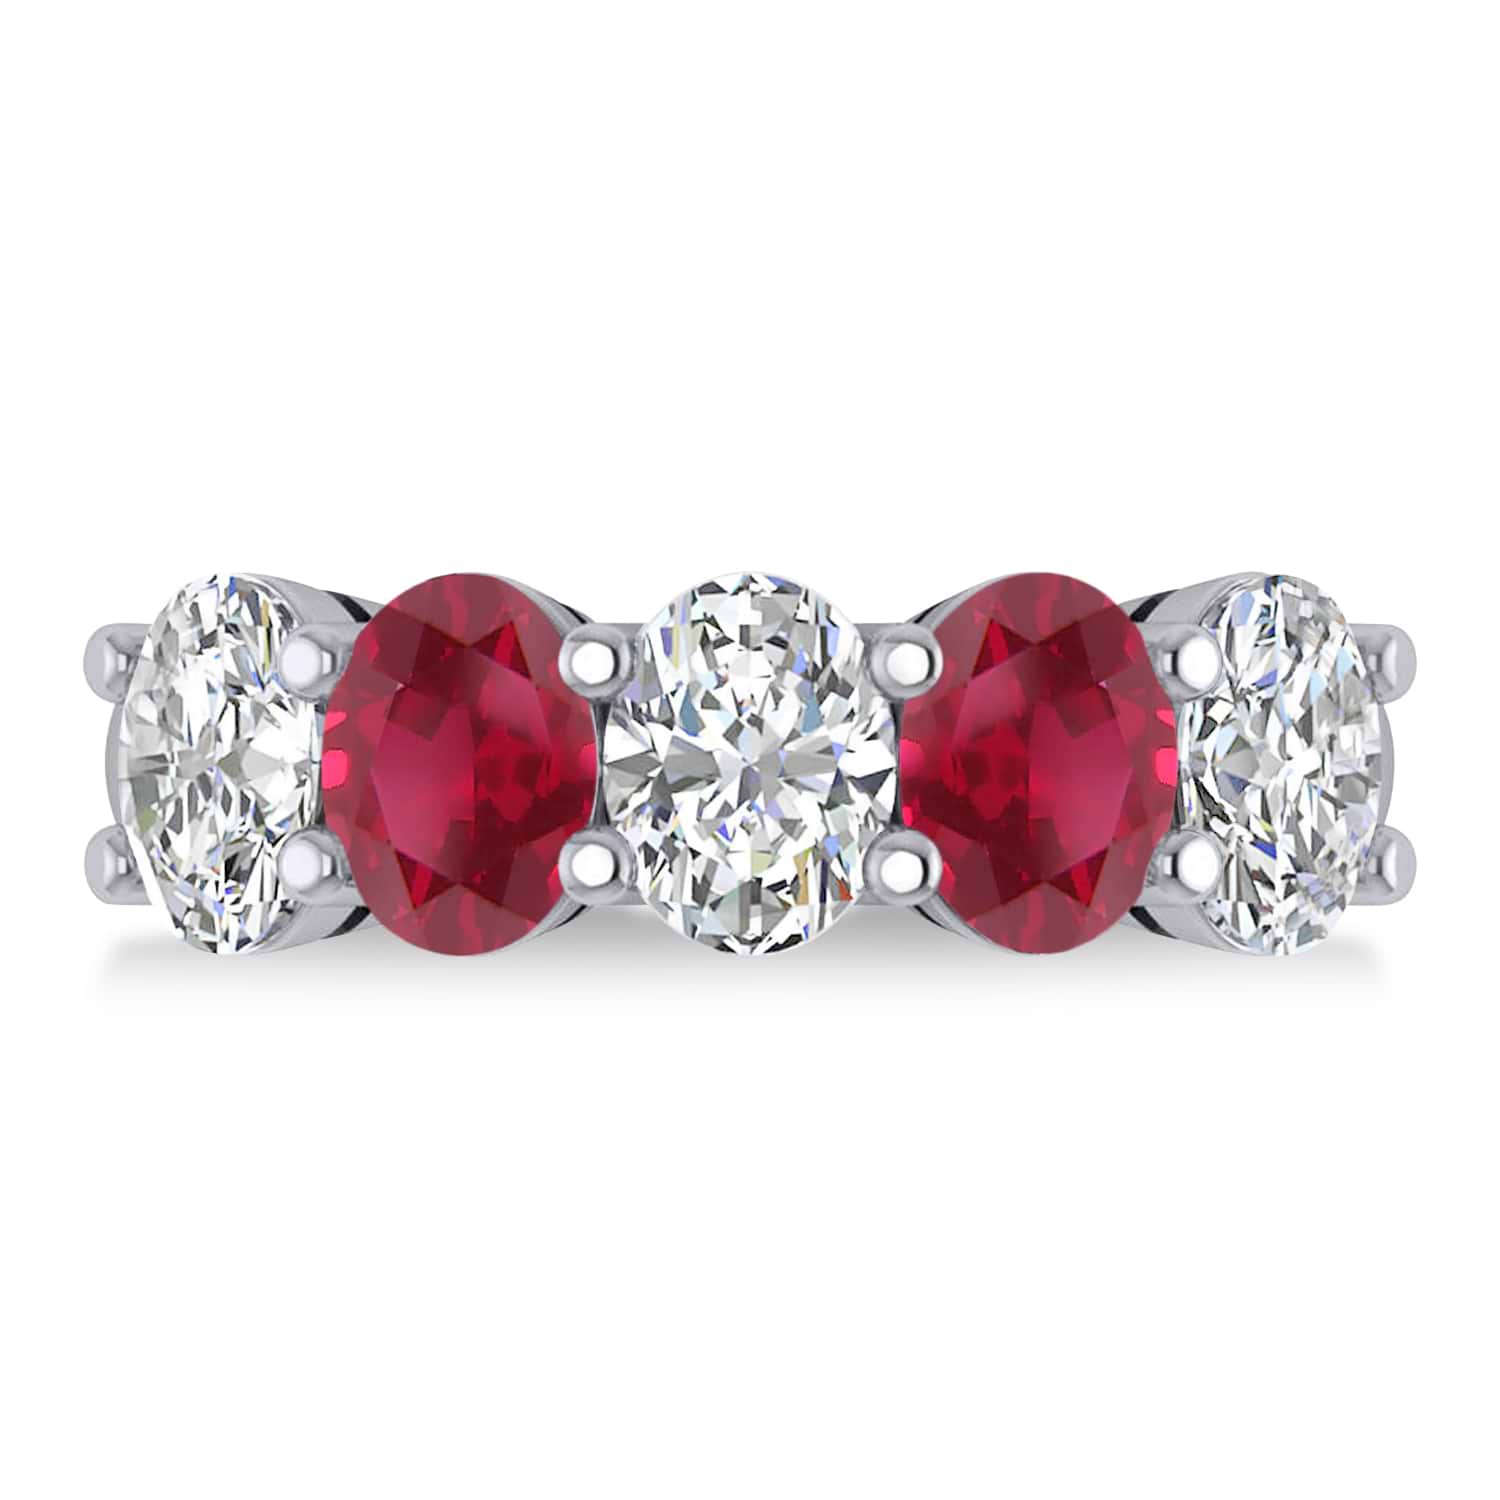 Oval Diamond & Ruby Five Stone Ring 14k White Gold (5.00ct)